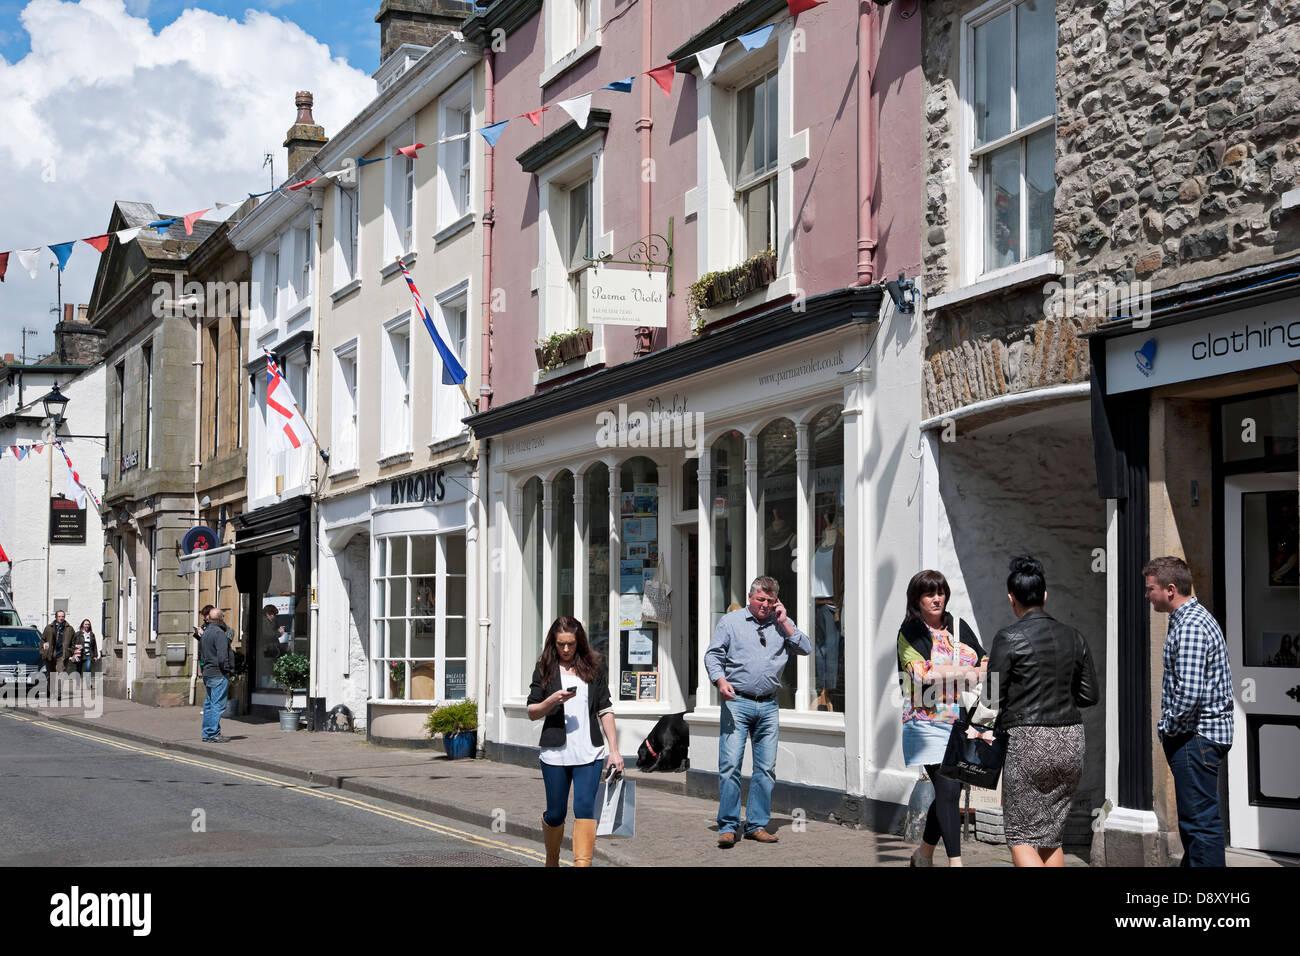 People tourists visitors outside Shops stores businesses in Main Street Kirkby Lonsdale Cumbria England UK United Kingdom GB Great Britain Stock Photo